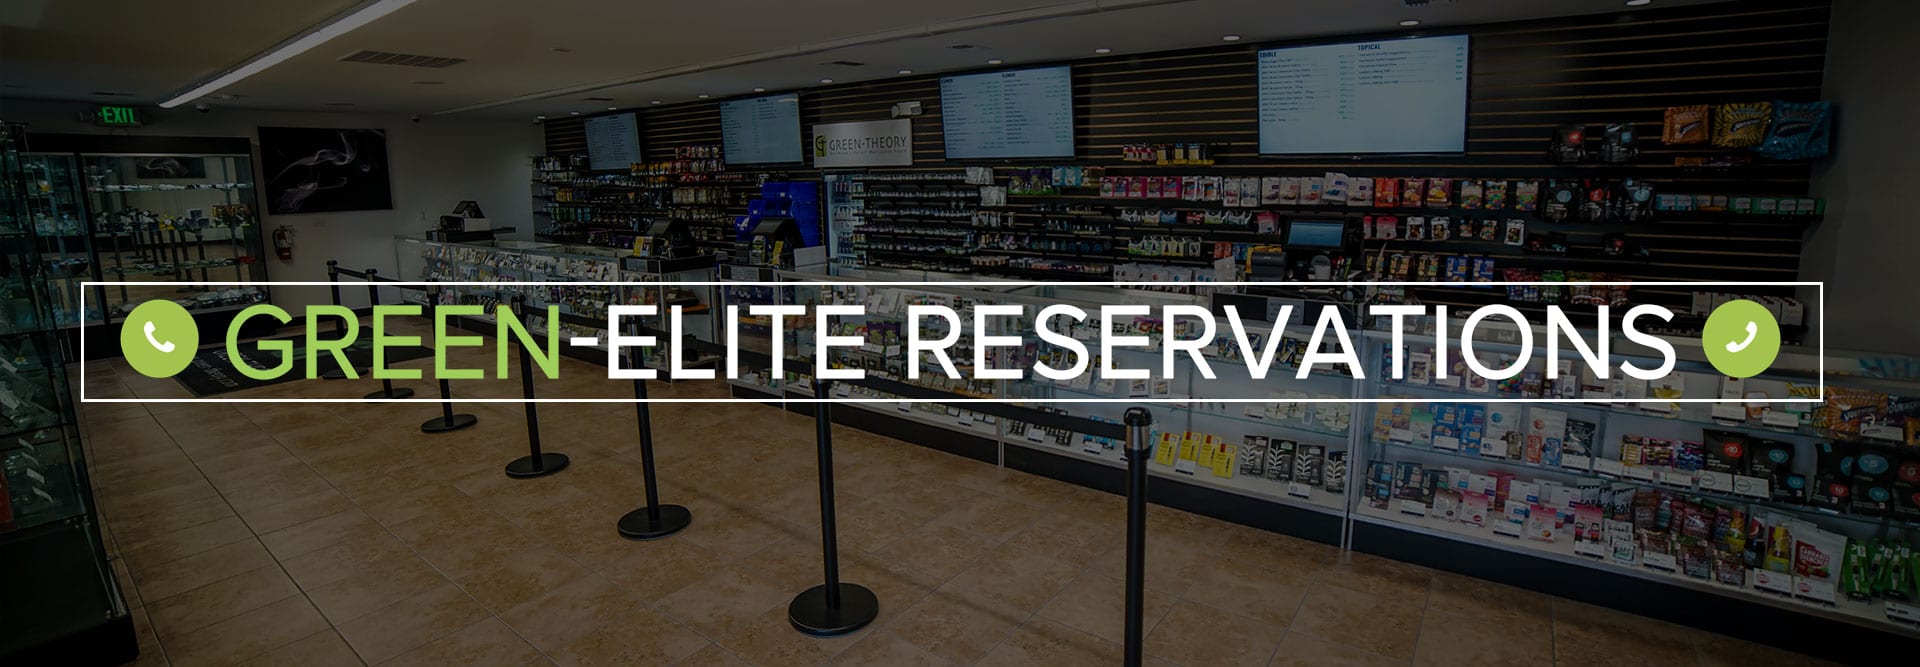 Green-Elite-Reservations-Green-Theory-bellevue